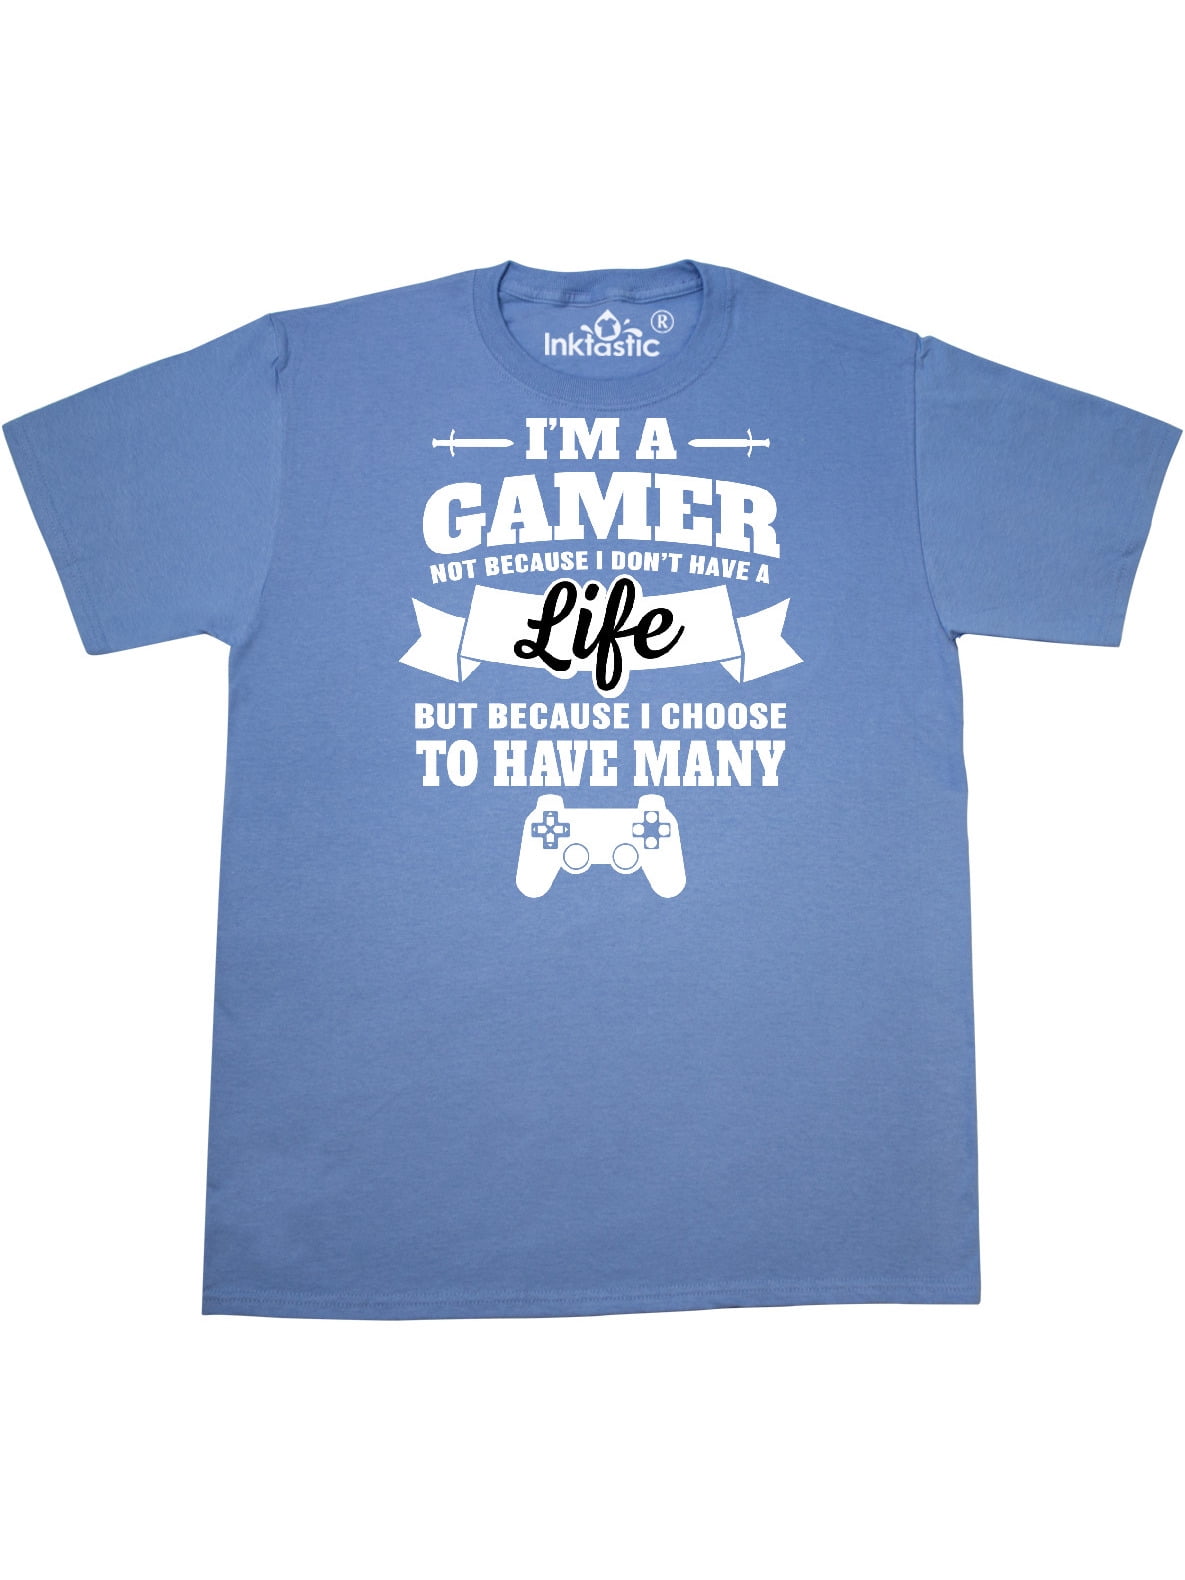 INKtastic - Inktastic Gamer Because I Choose to Have Many Lives Adult T ...